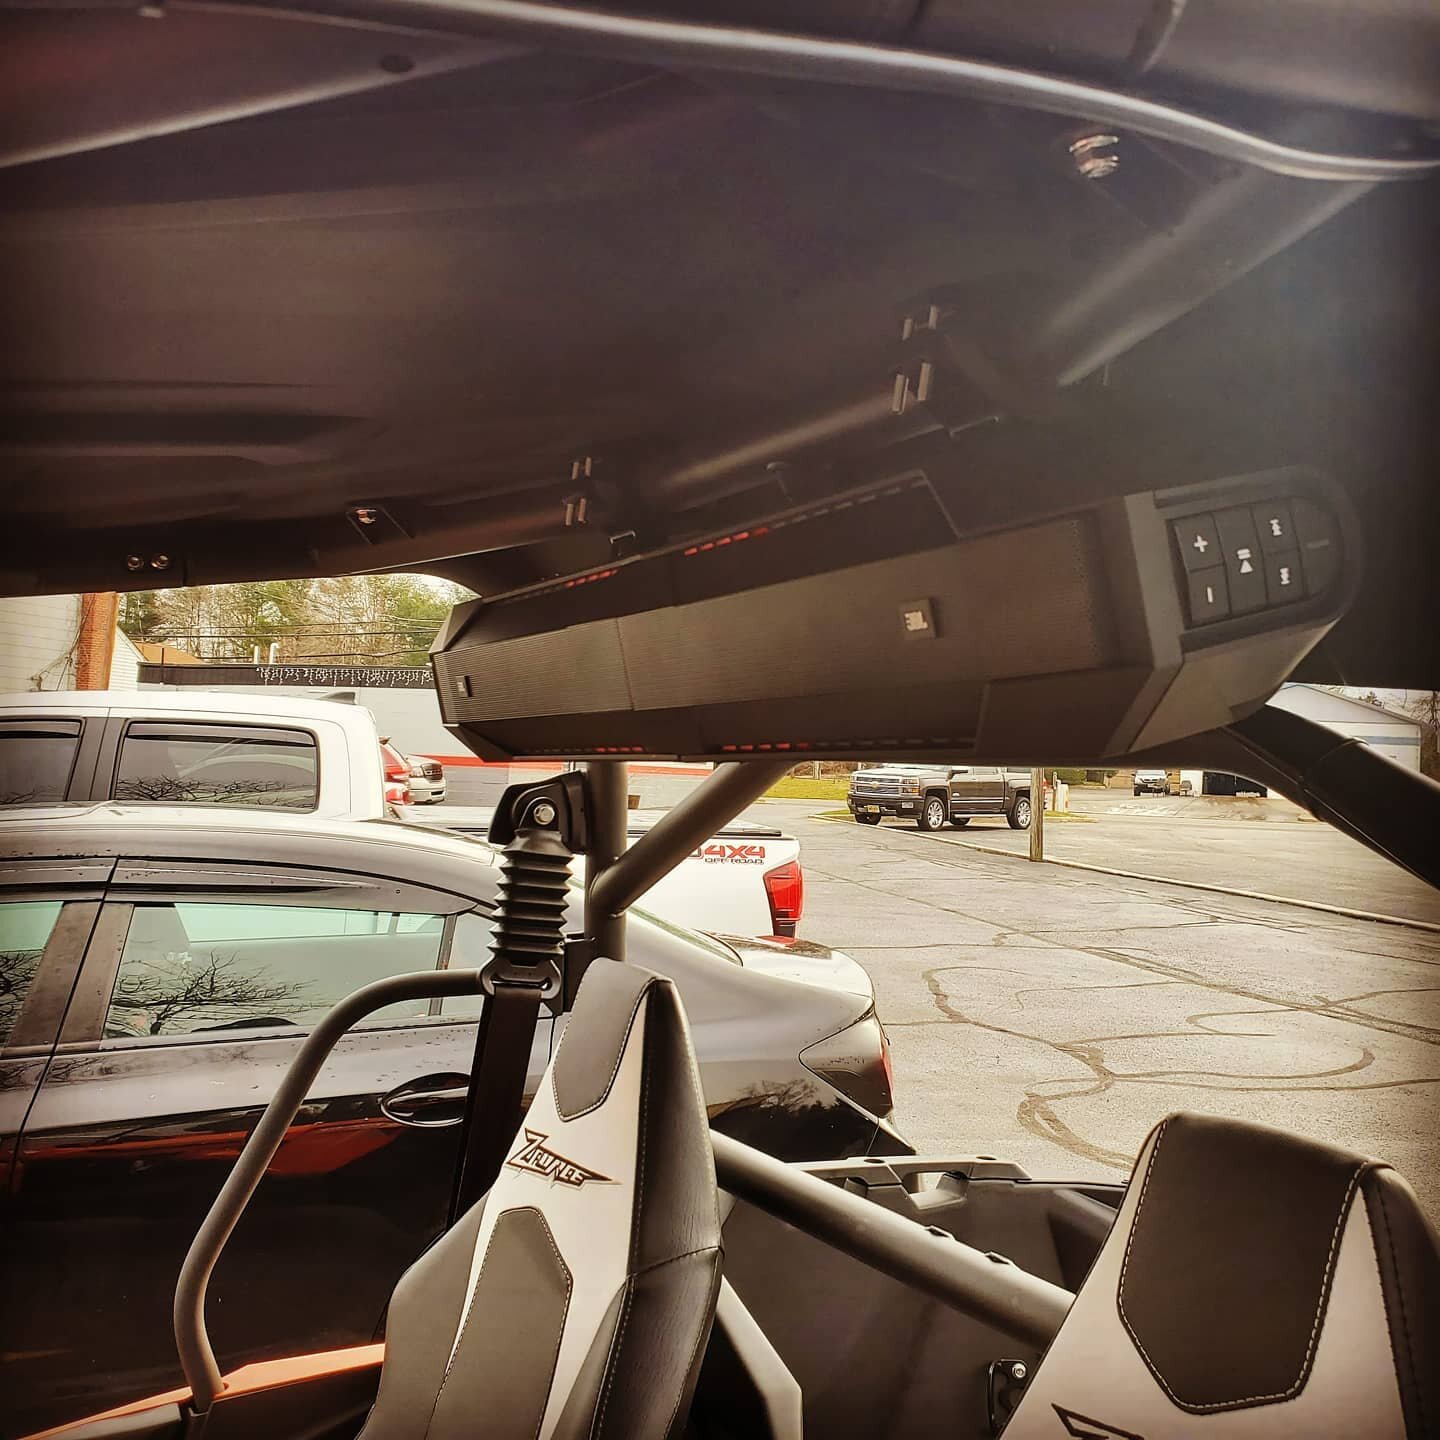 Installation of a Hiese light bar along with JBL's UB4100 Amplified sound bar

#mecp #mobileelectronics #installer #12volt #happycustomer #southjersey #business #ledlights #led #HeiseLED #weare12volt #jblpro